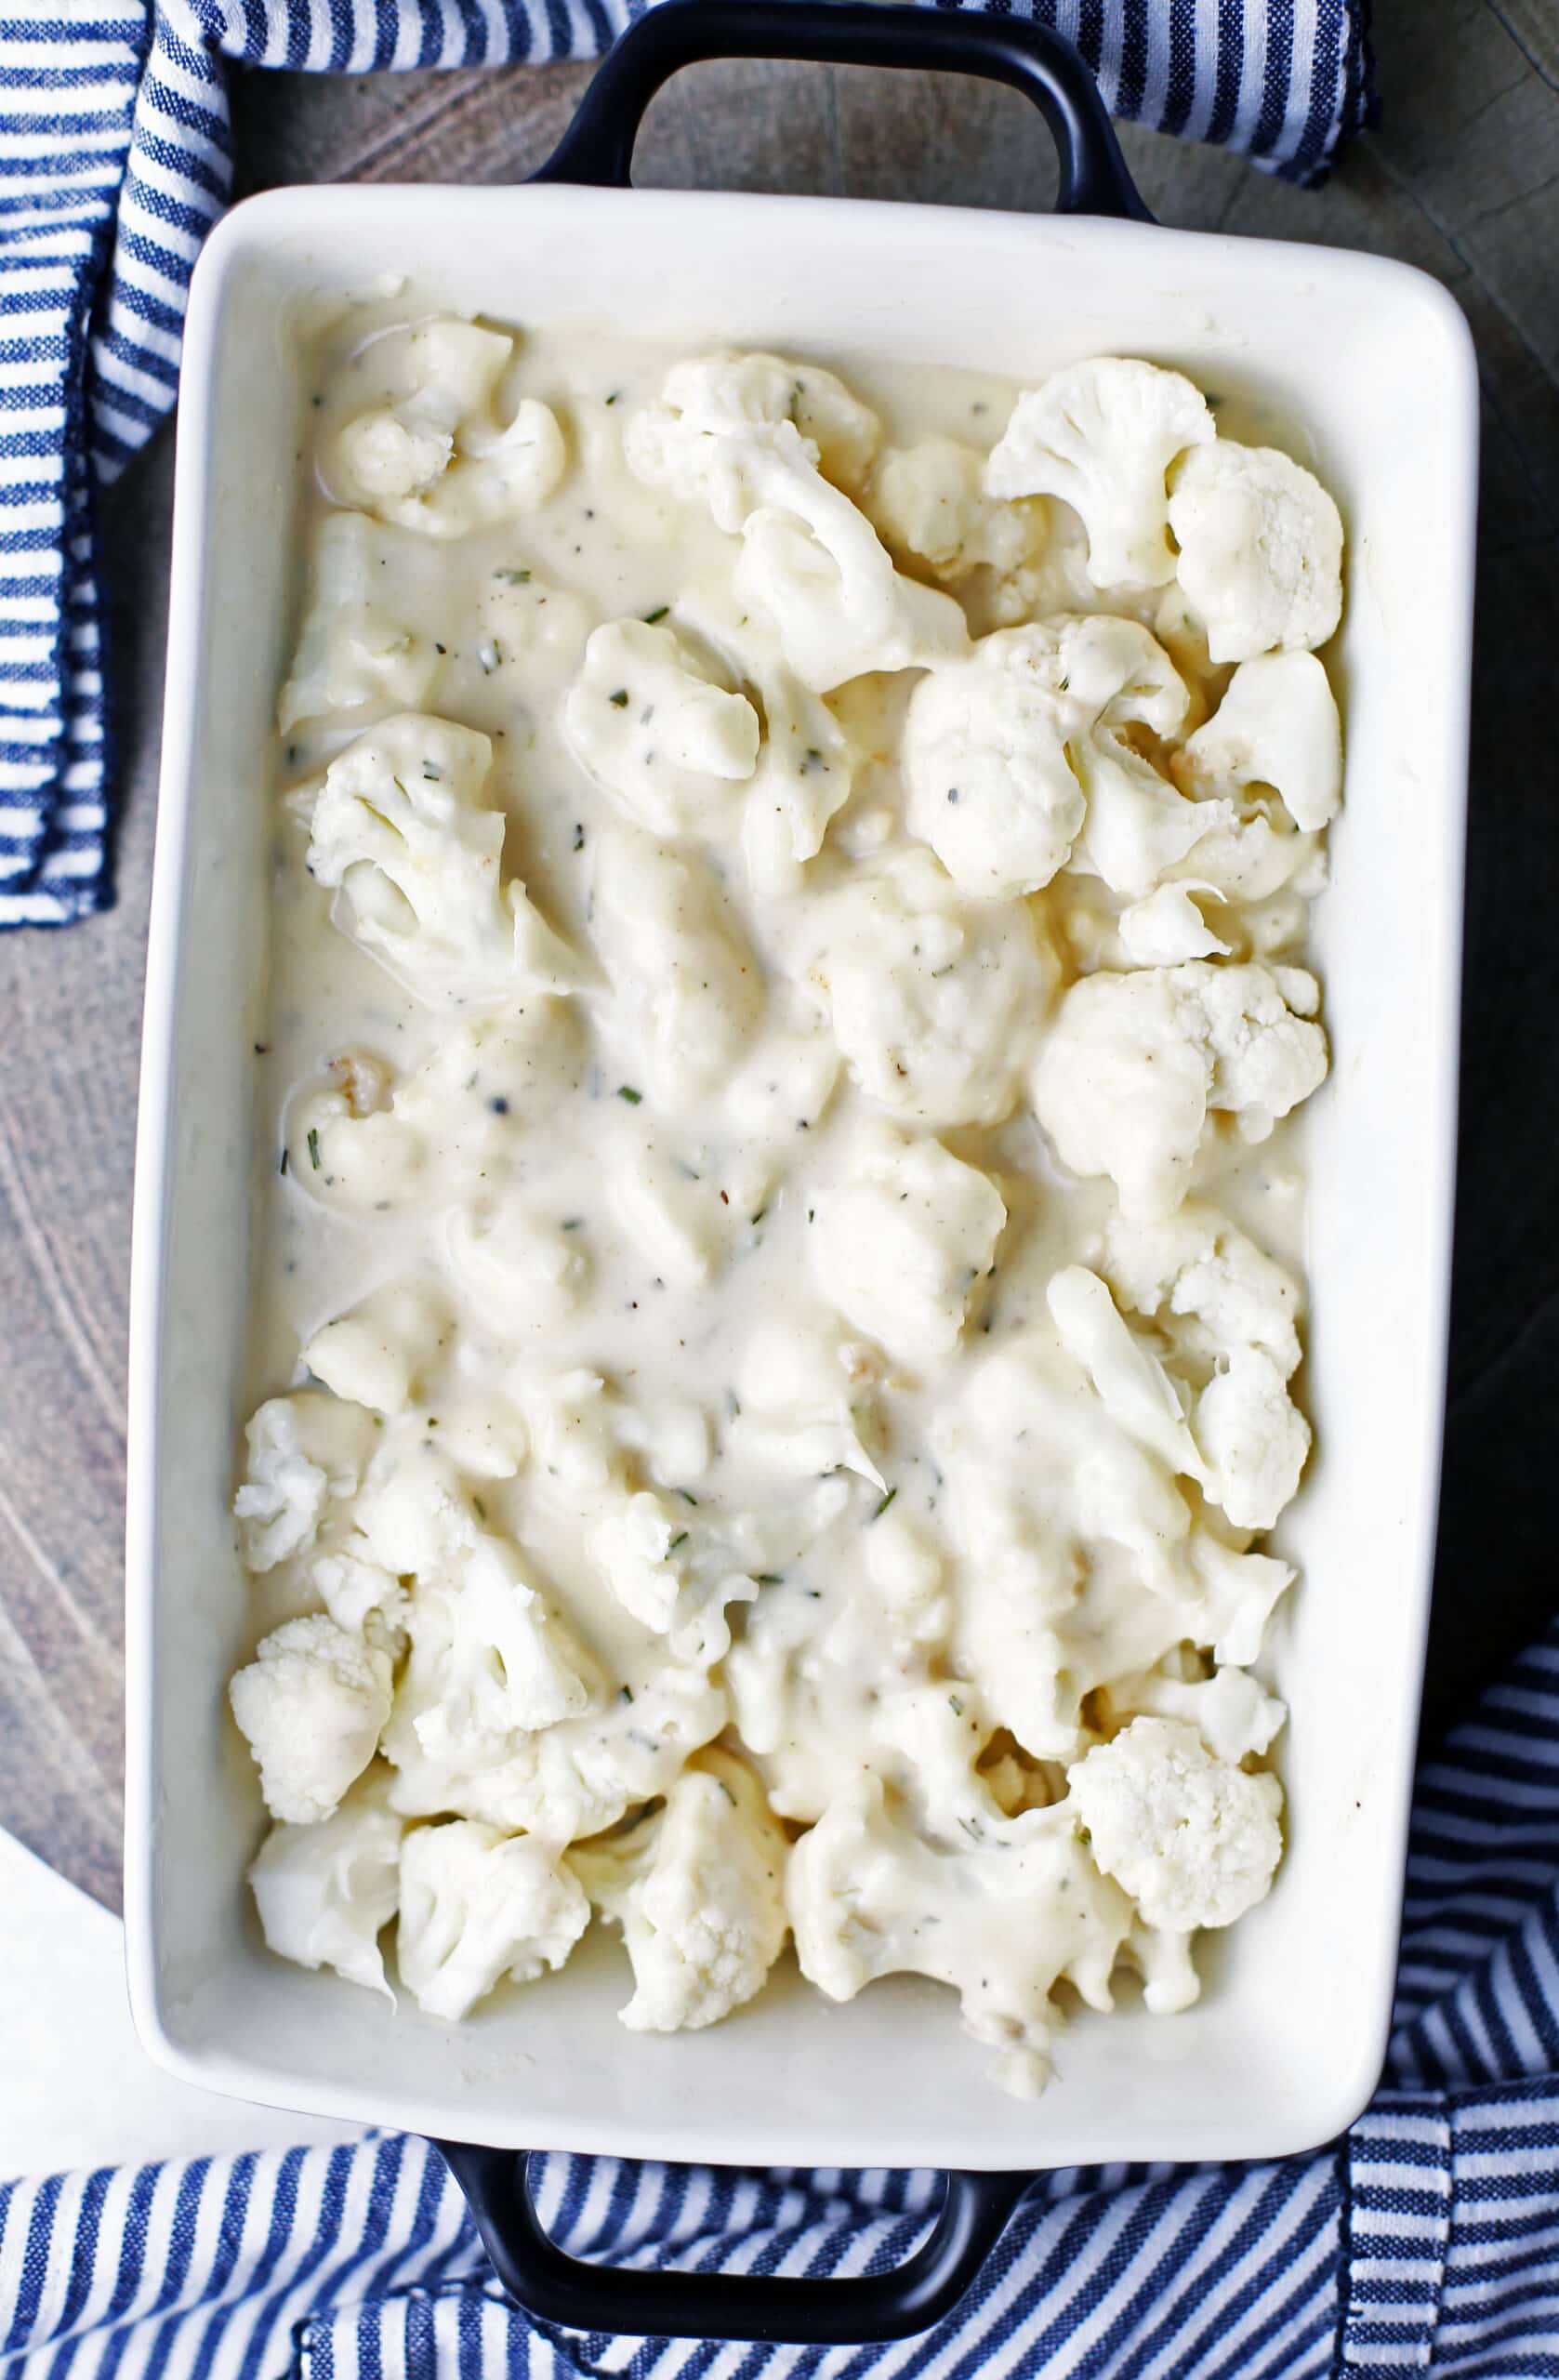 A casserole dish with raw cauliflower florets and cheese white sauce in it.